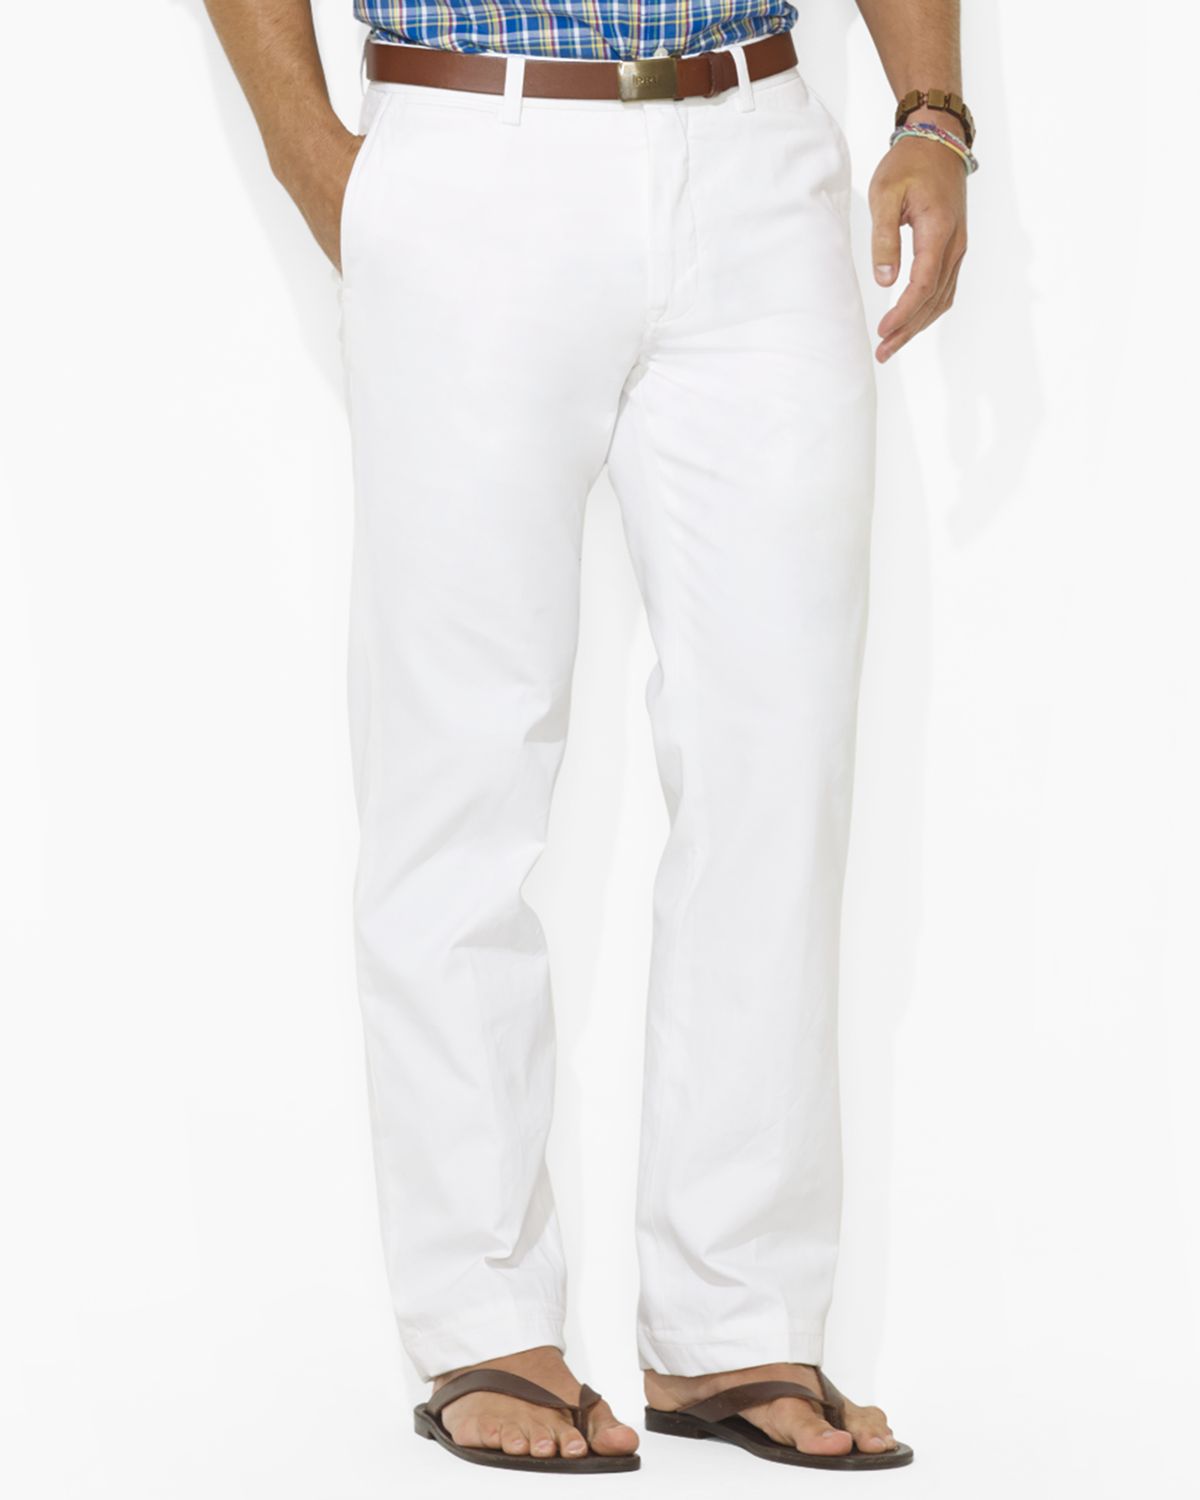 Lyst - Ralph Lauren Polo Classicfit Lightweight Chino Pant in White for Men